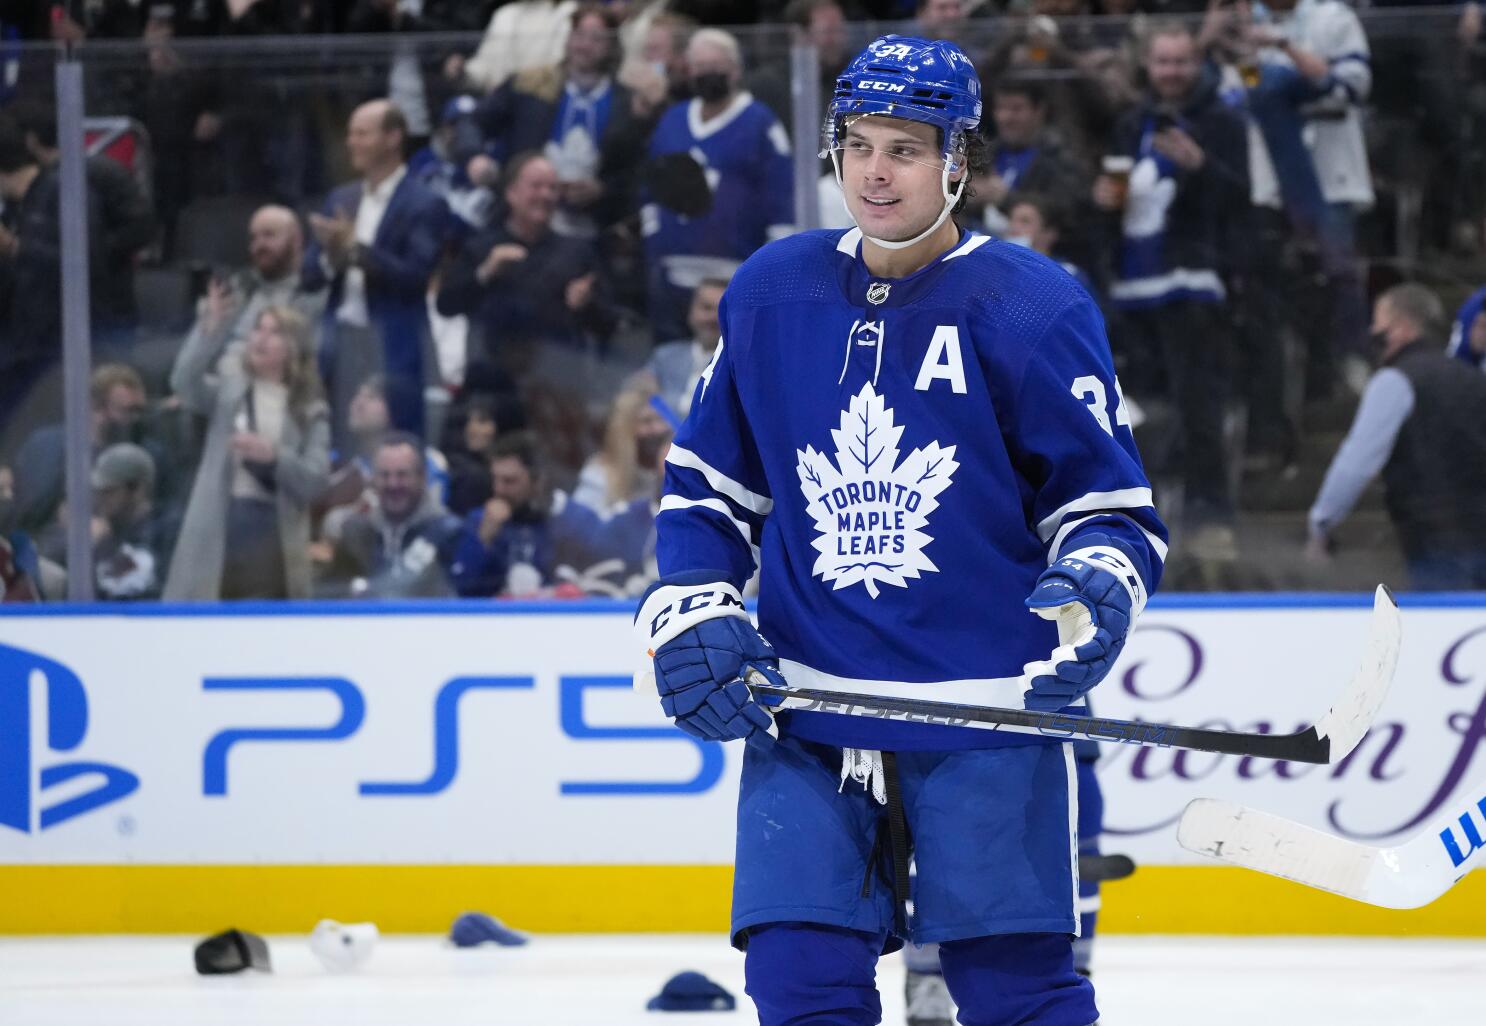 Matthews scores 2 late goals for hat trick, Maple Leafs beat